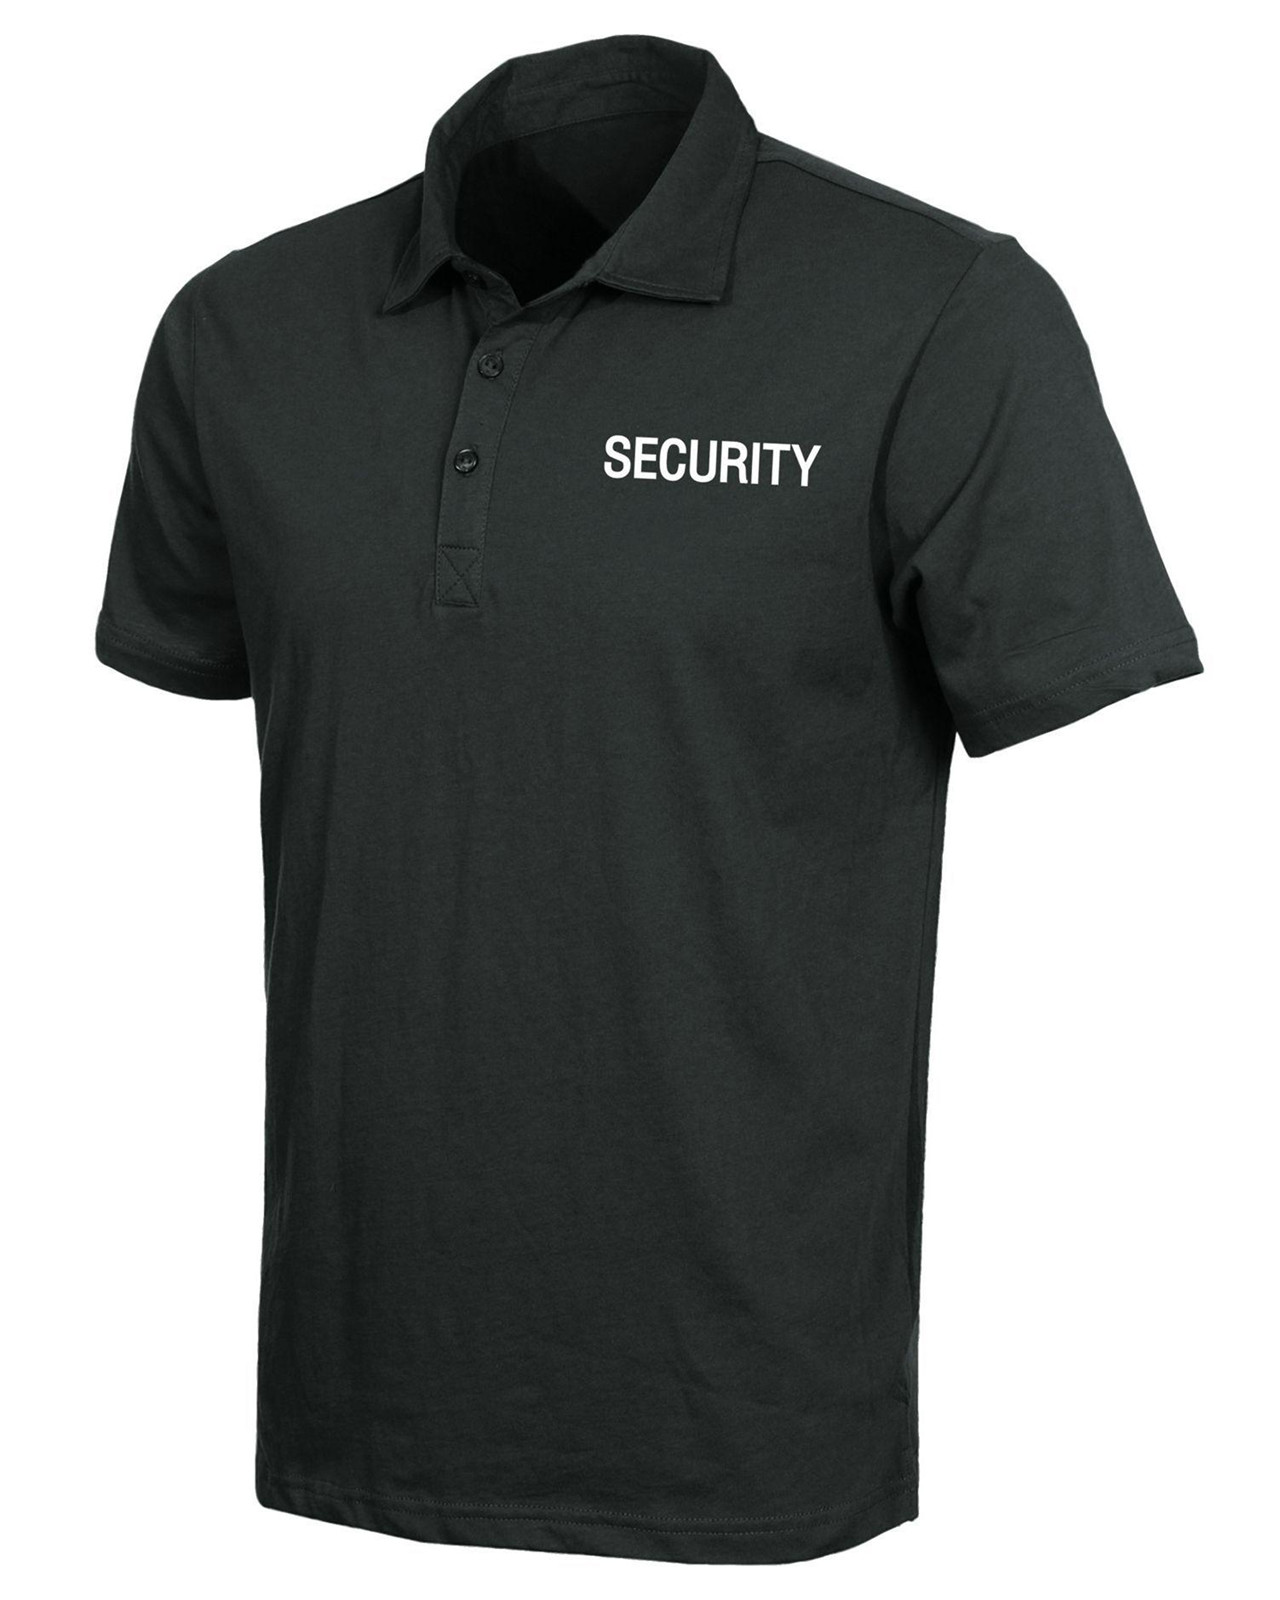 15: Rothco Svedtransporterende Polo T-shirt (Sort m. Security, XL)